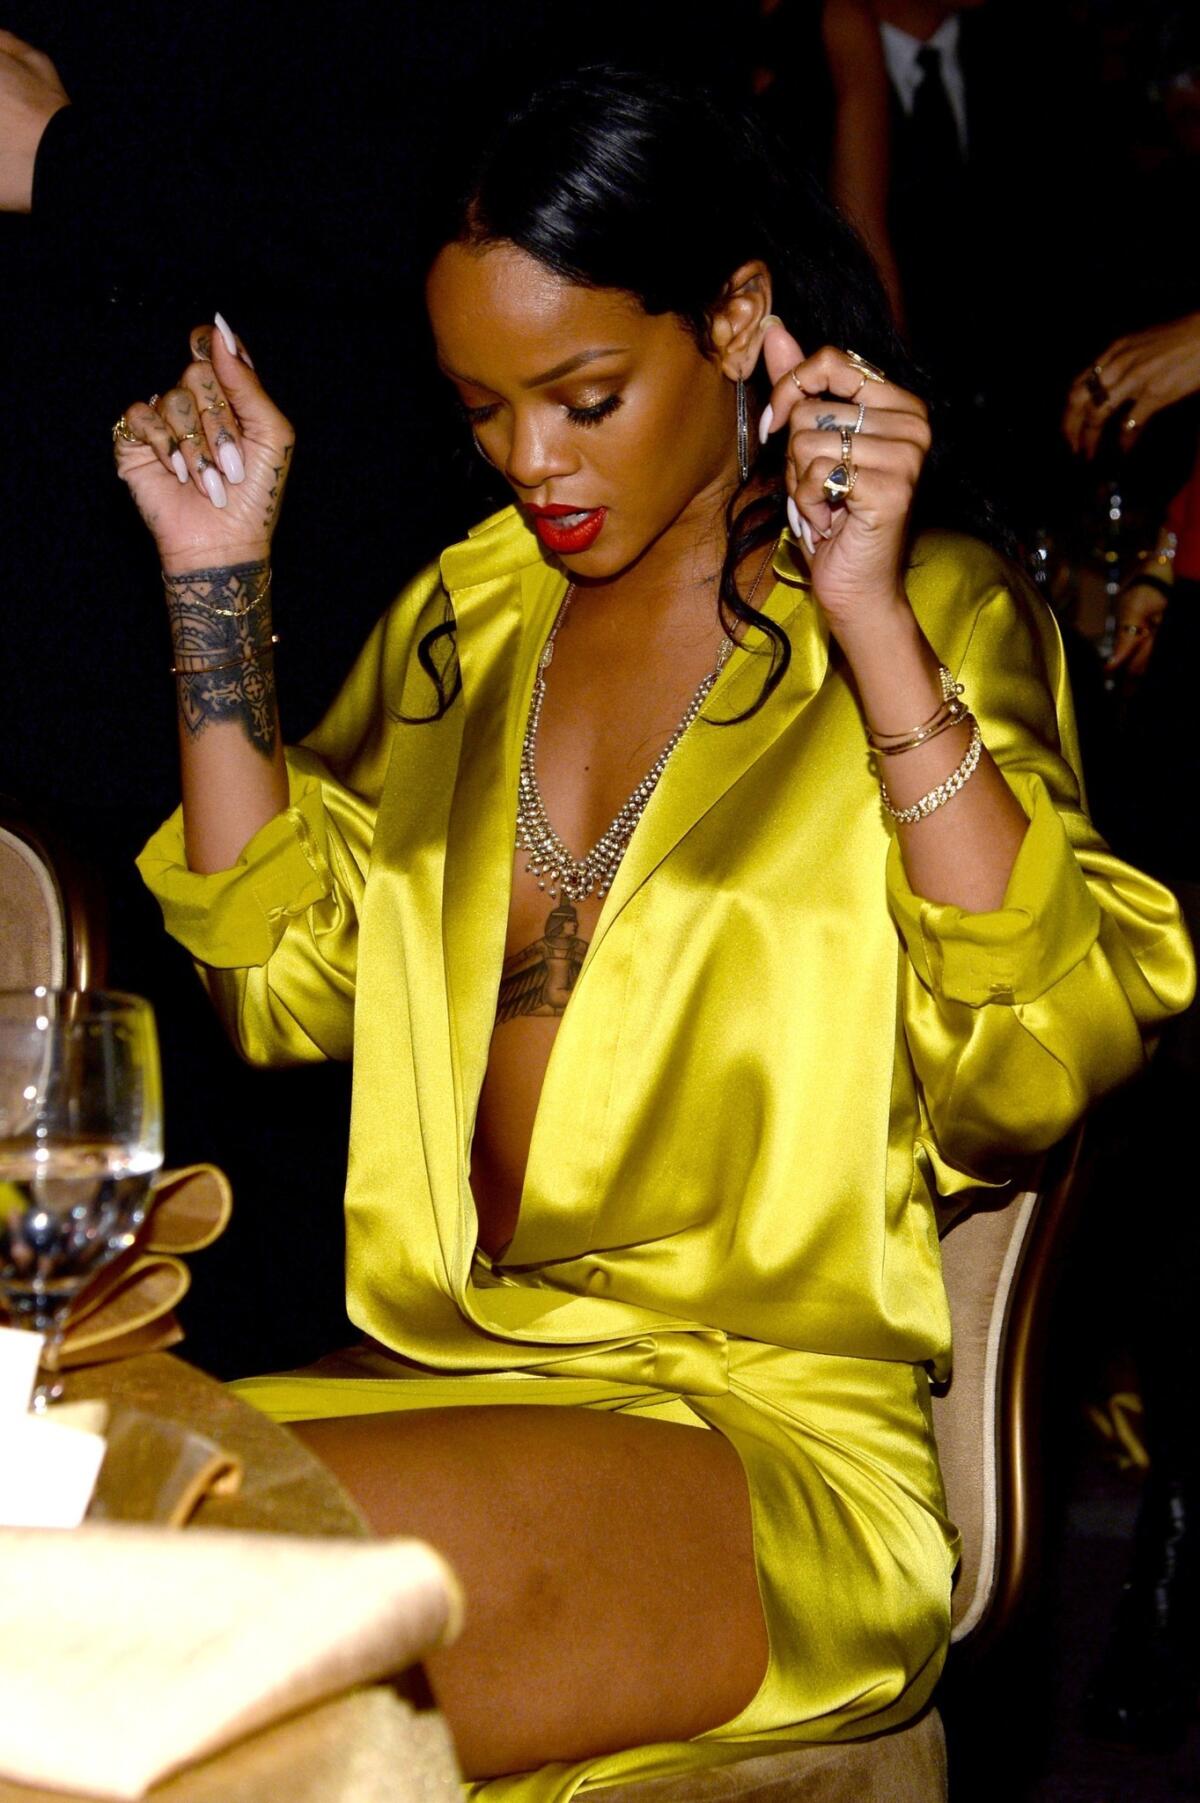 Rihanna seems surprised that her wrap dress is coming unwrapped during the Pre-Grammy Gala at the Beverly Hilton on Saturday in Beverly Hills.